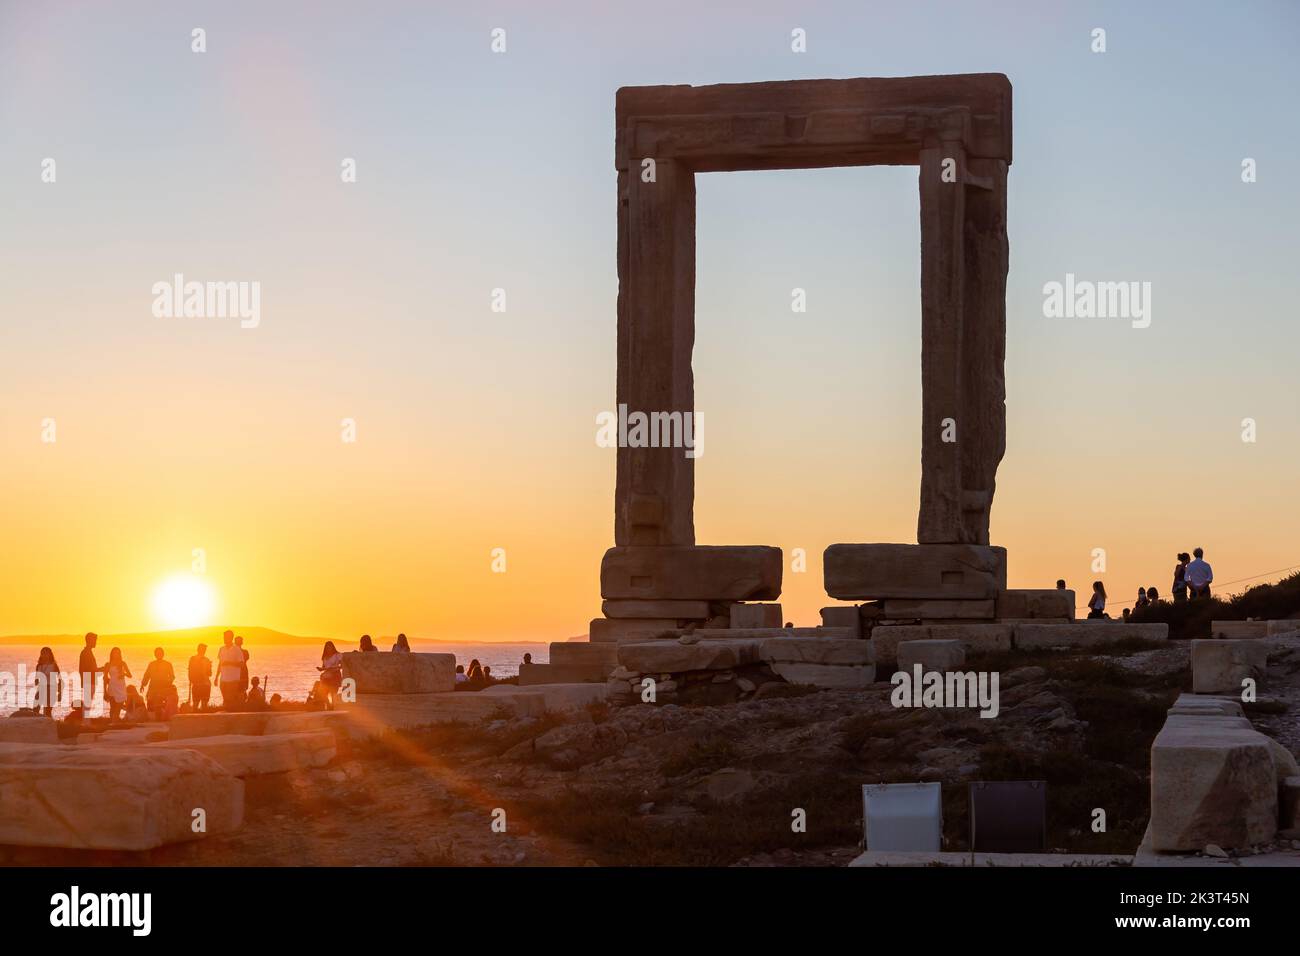 Naxos island, sunset over Temple of Apollo, Cyclades Greece. People admires the sundown from the islet of Palatia. Sunbeams paint the sky background. Stock Photo